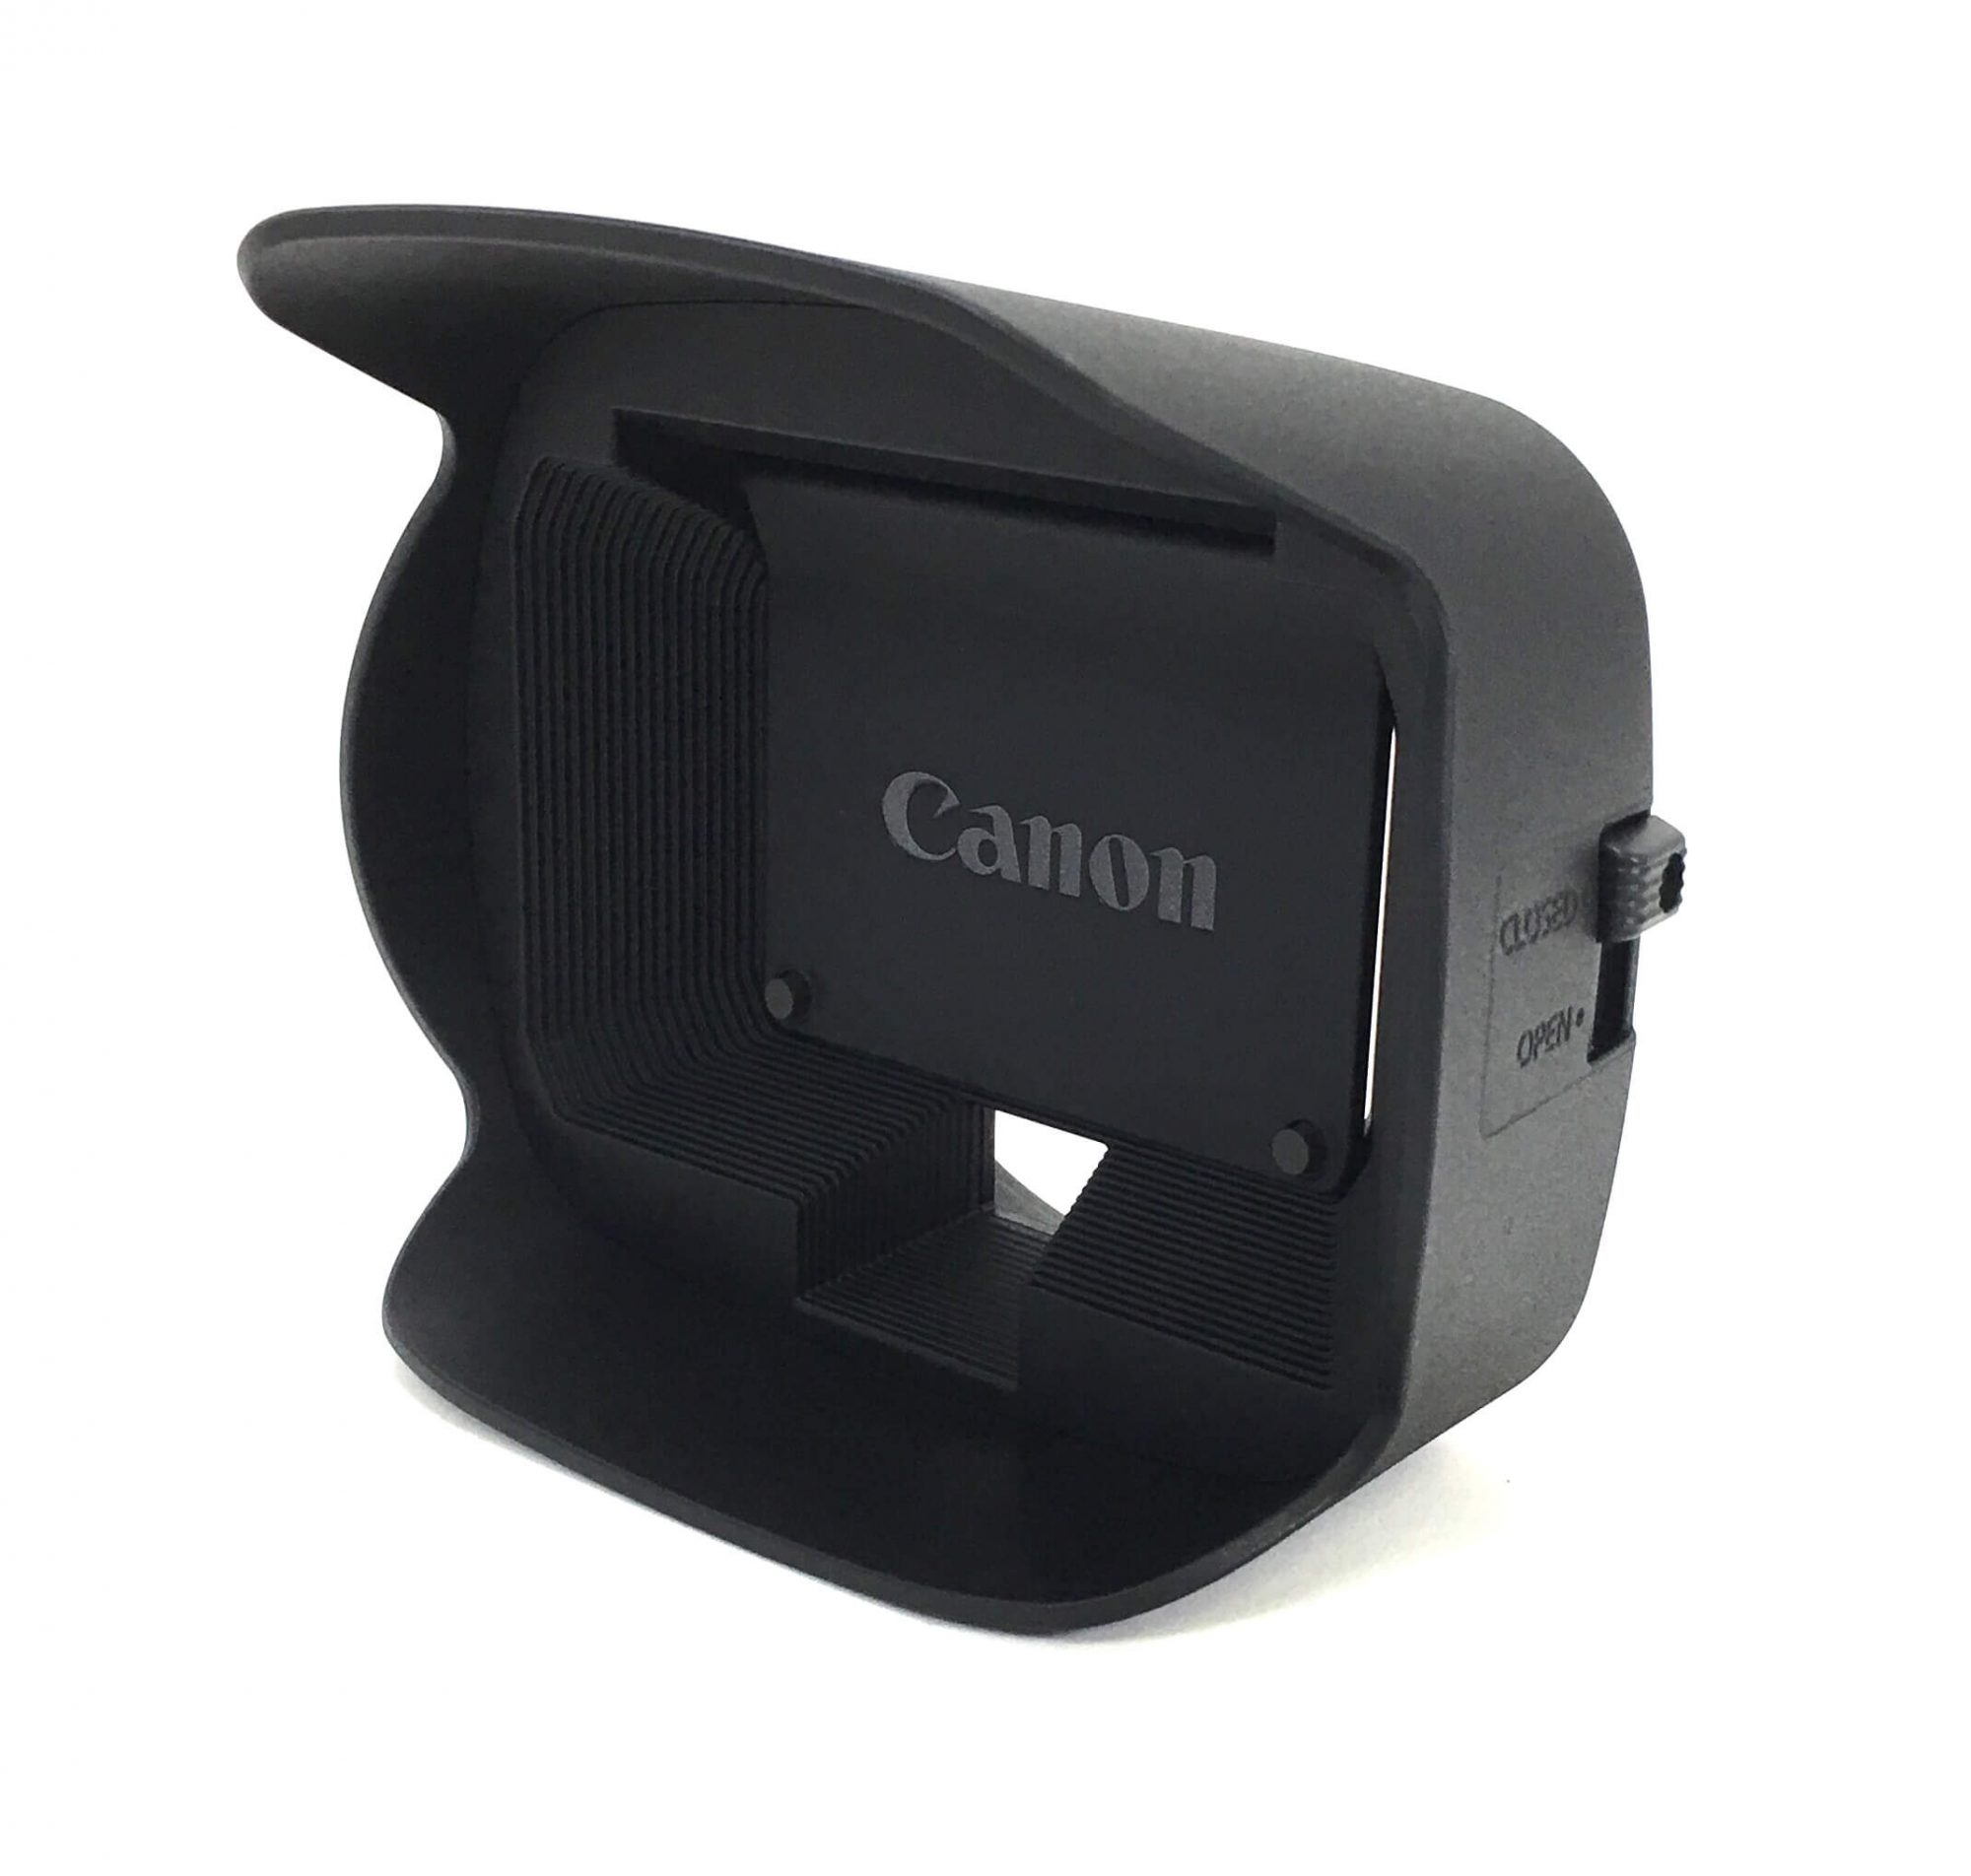 Original Lens Hood that fits on the the Canon XA30 camcorder. It is a genuine Canon part, sourced directly from Canon USA. Brand new factory fresh. Free Shipping.